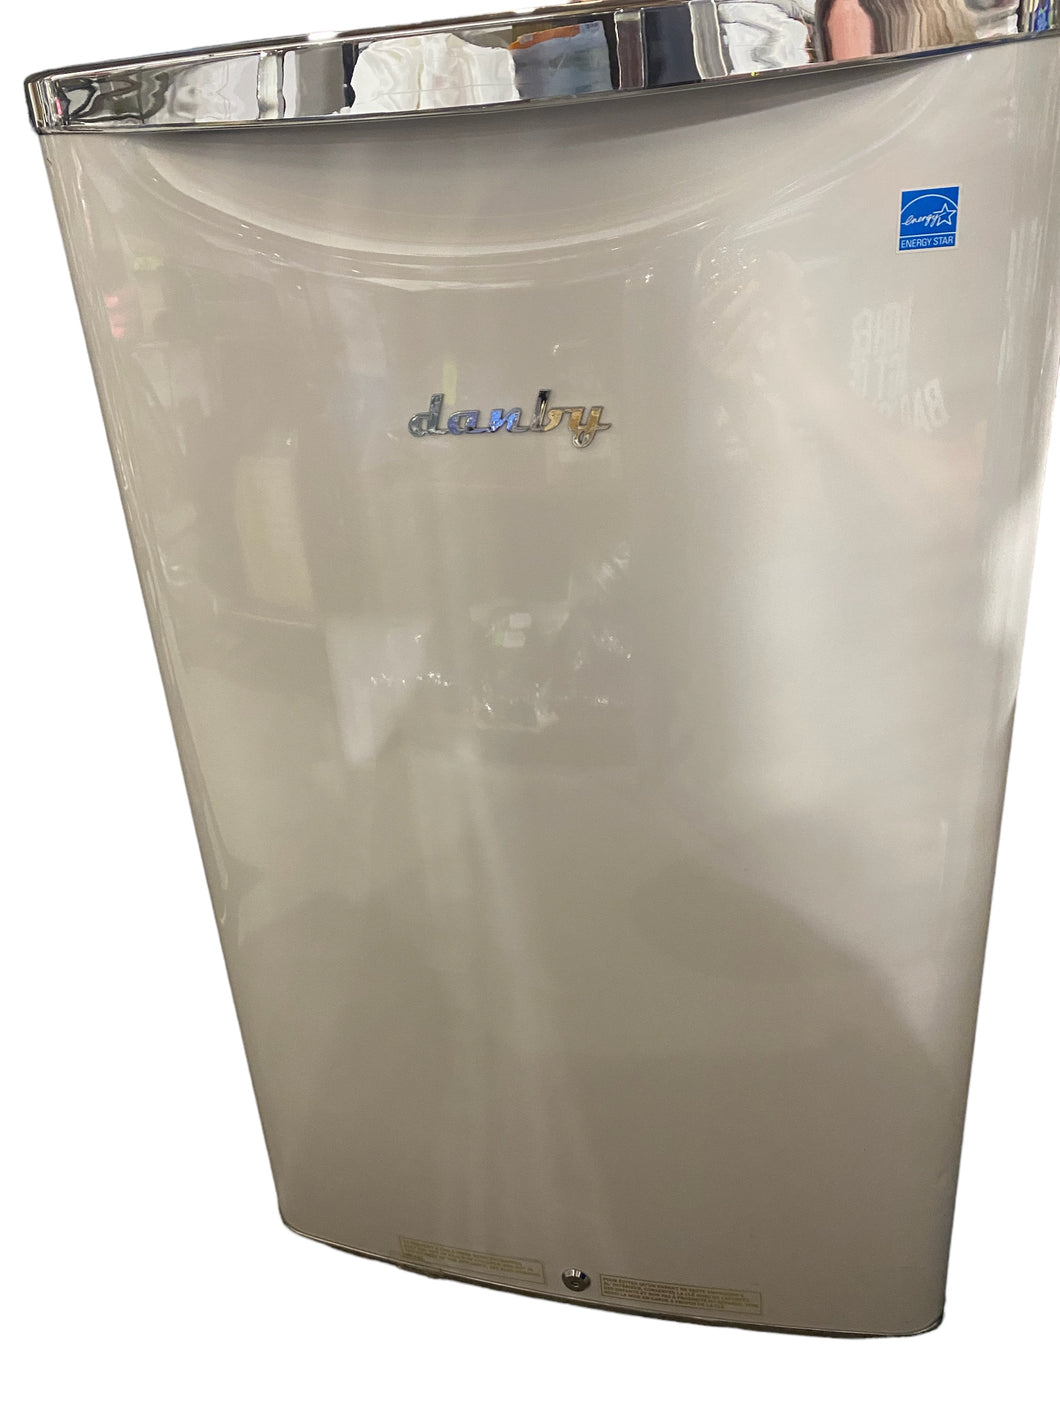 Danby 4.4 Cu.ft. Contemporary Classic Compact Refrigerator DAR044A6PDB-RM STORE PICKUP ONLY - FreemanLiquidators - [product_description]